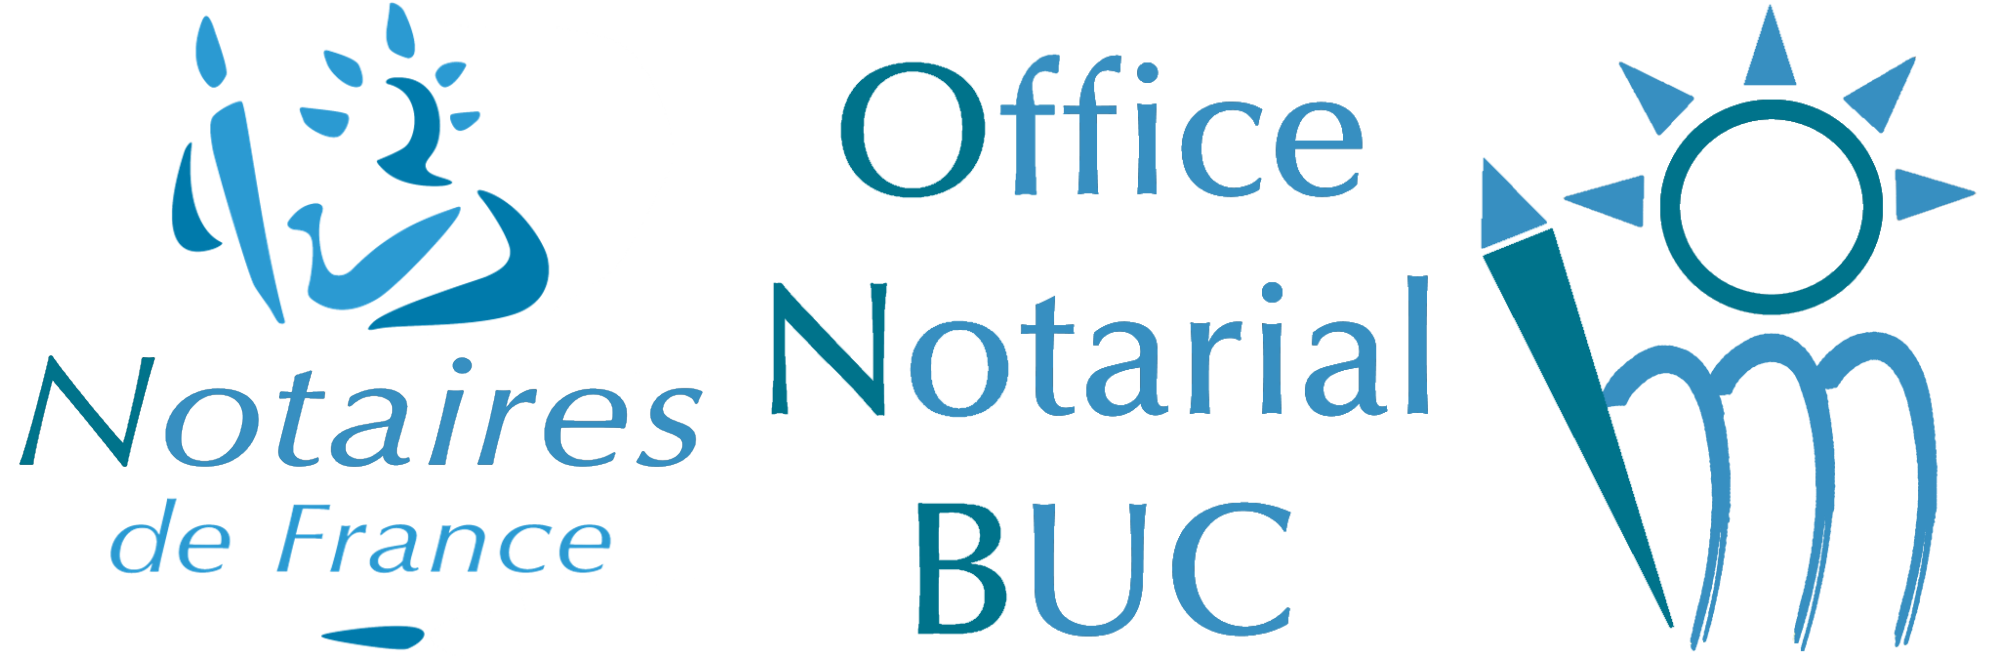 Office Notarial Buc - Versailles Grand Parc - Notaire